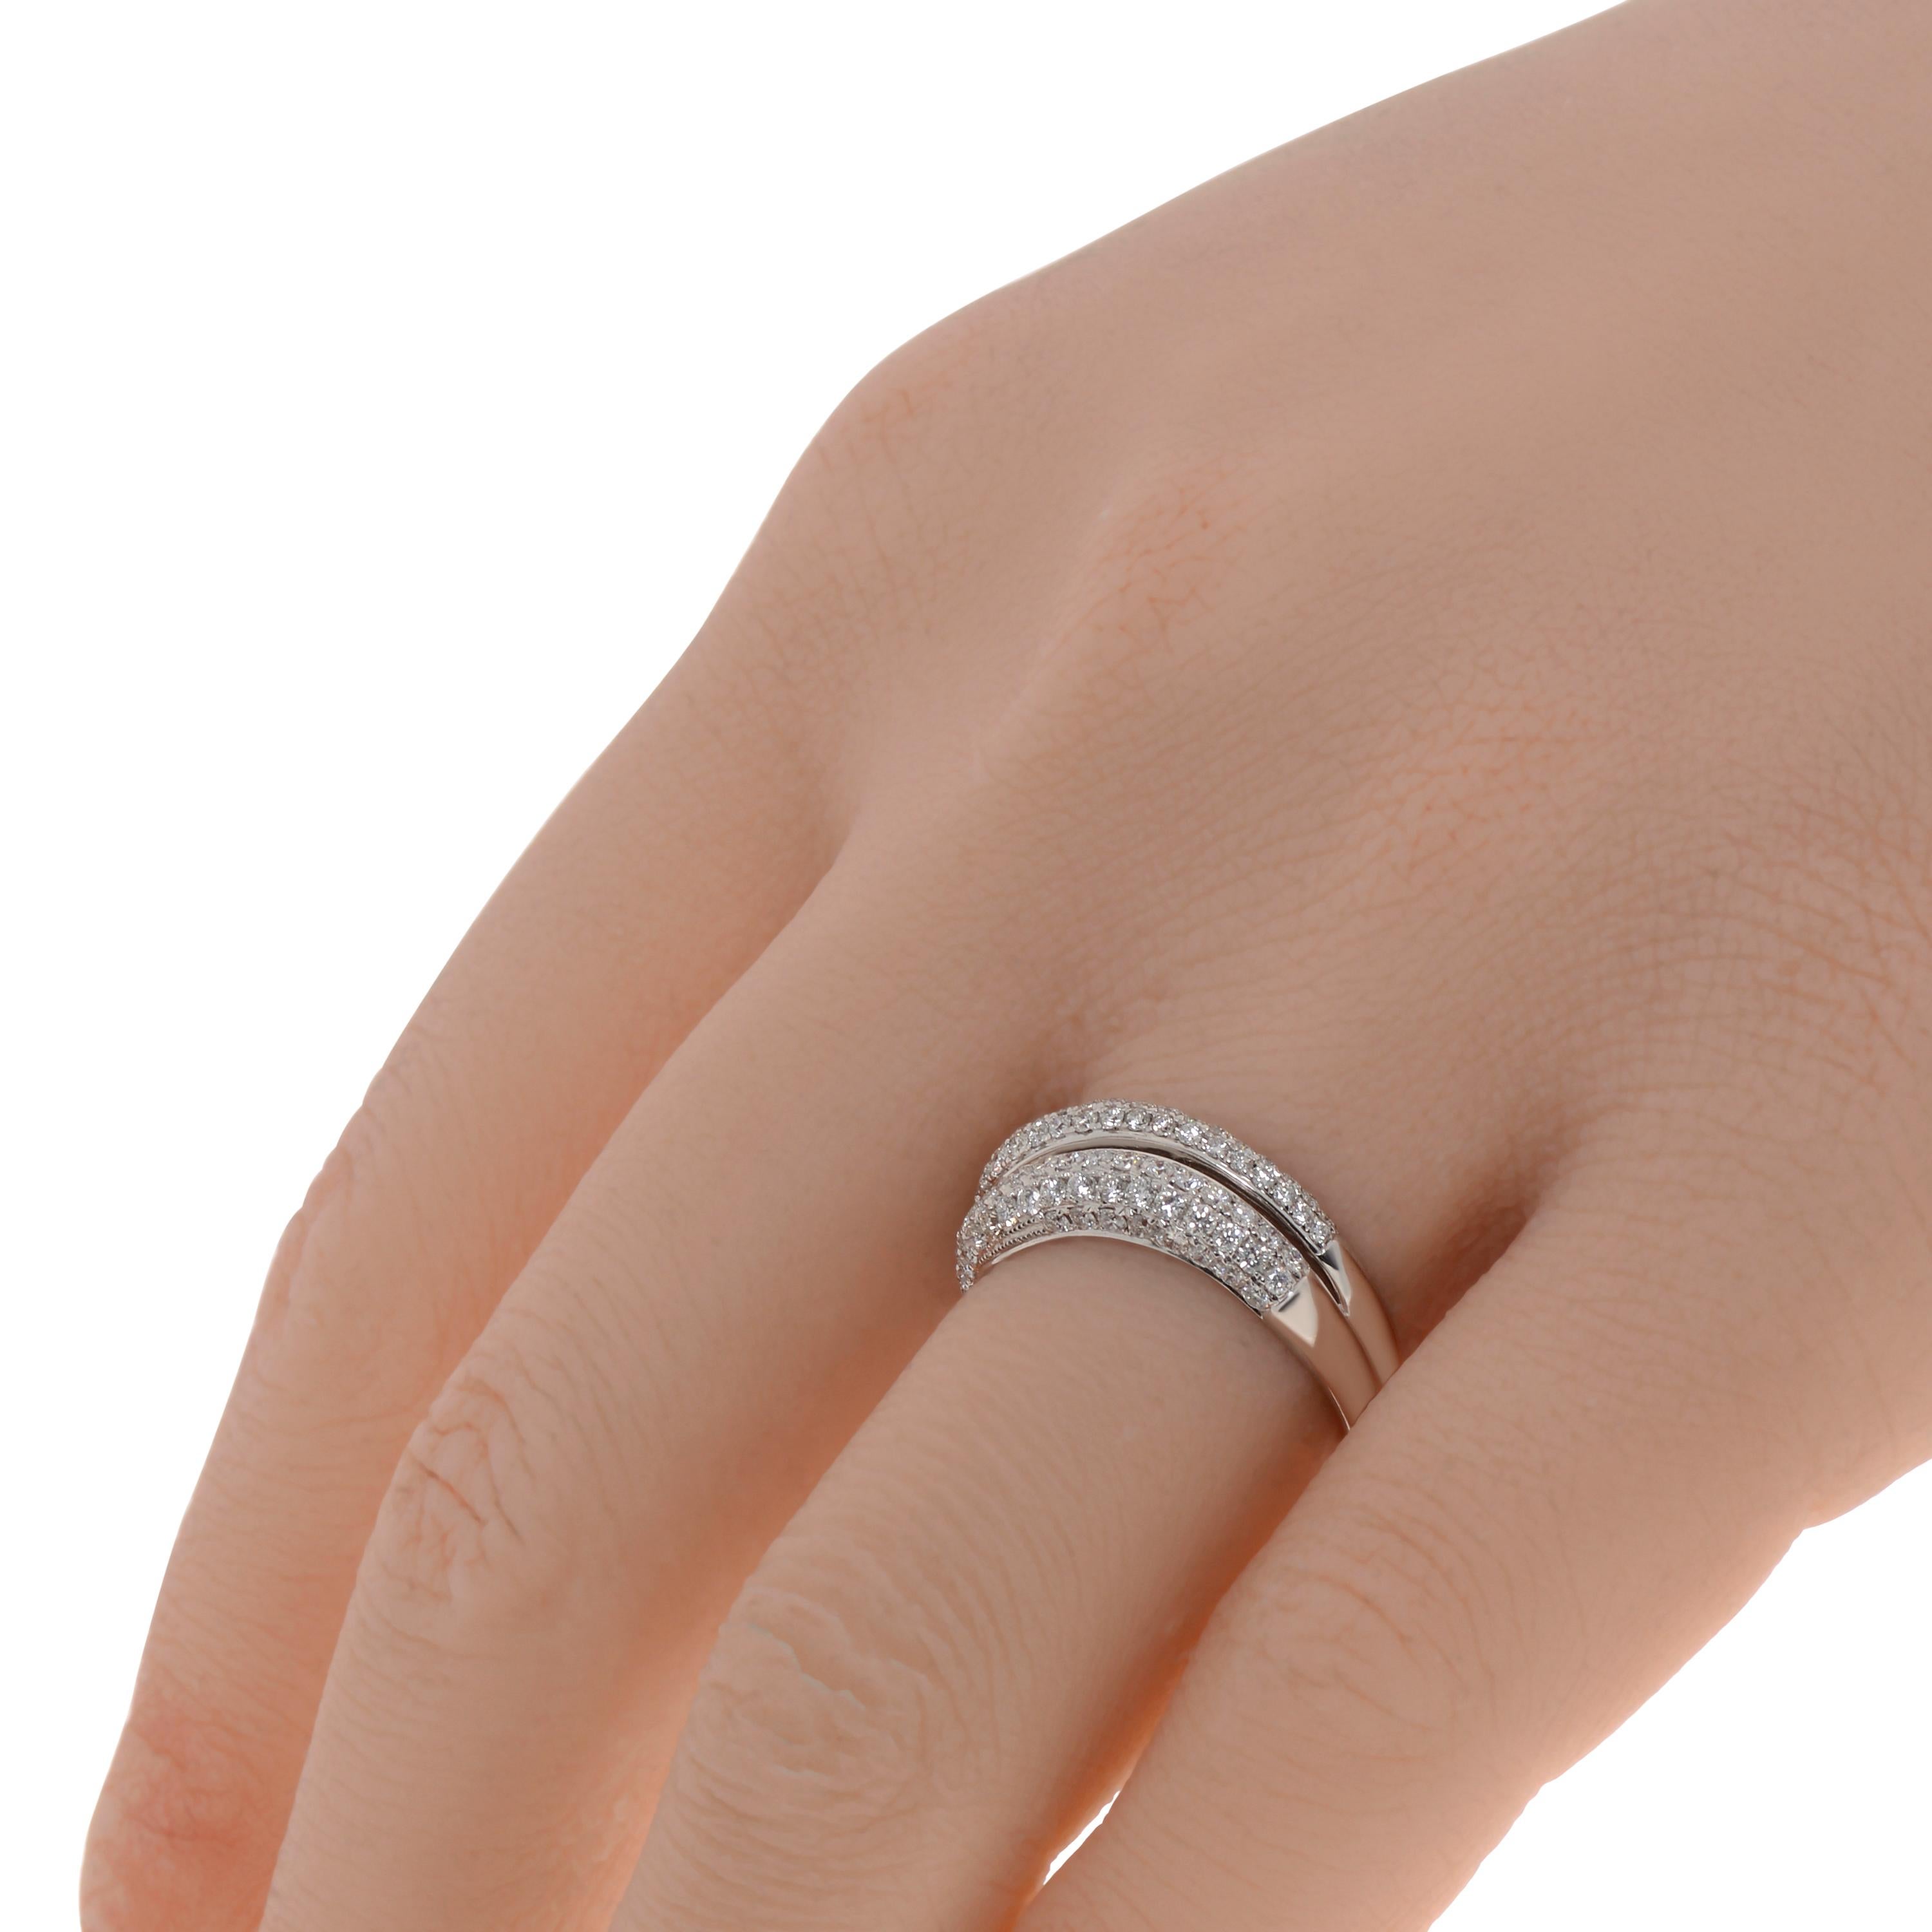 This show-stopping Piero Milano 18K White Gold Curved Ring features two layers of striking illusion set diamonds 0.82ct. tw. detailing a curved white gold band. The ring size is 8 (57). The Band Width is 6.1mm. The Weight is 3.8g. Diamond Color: